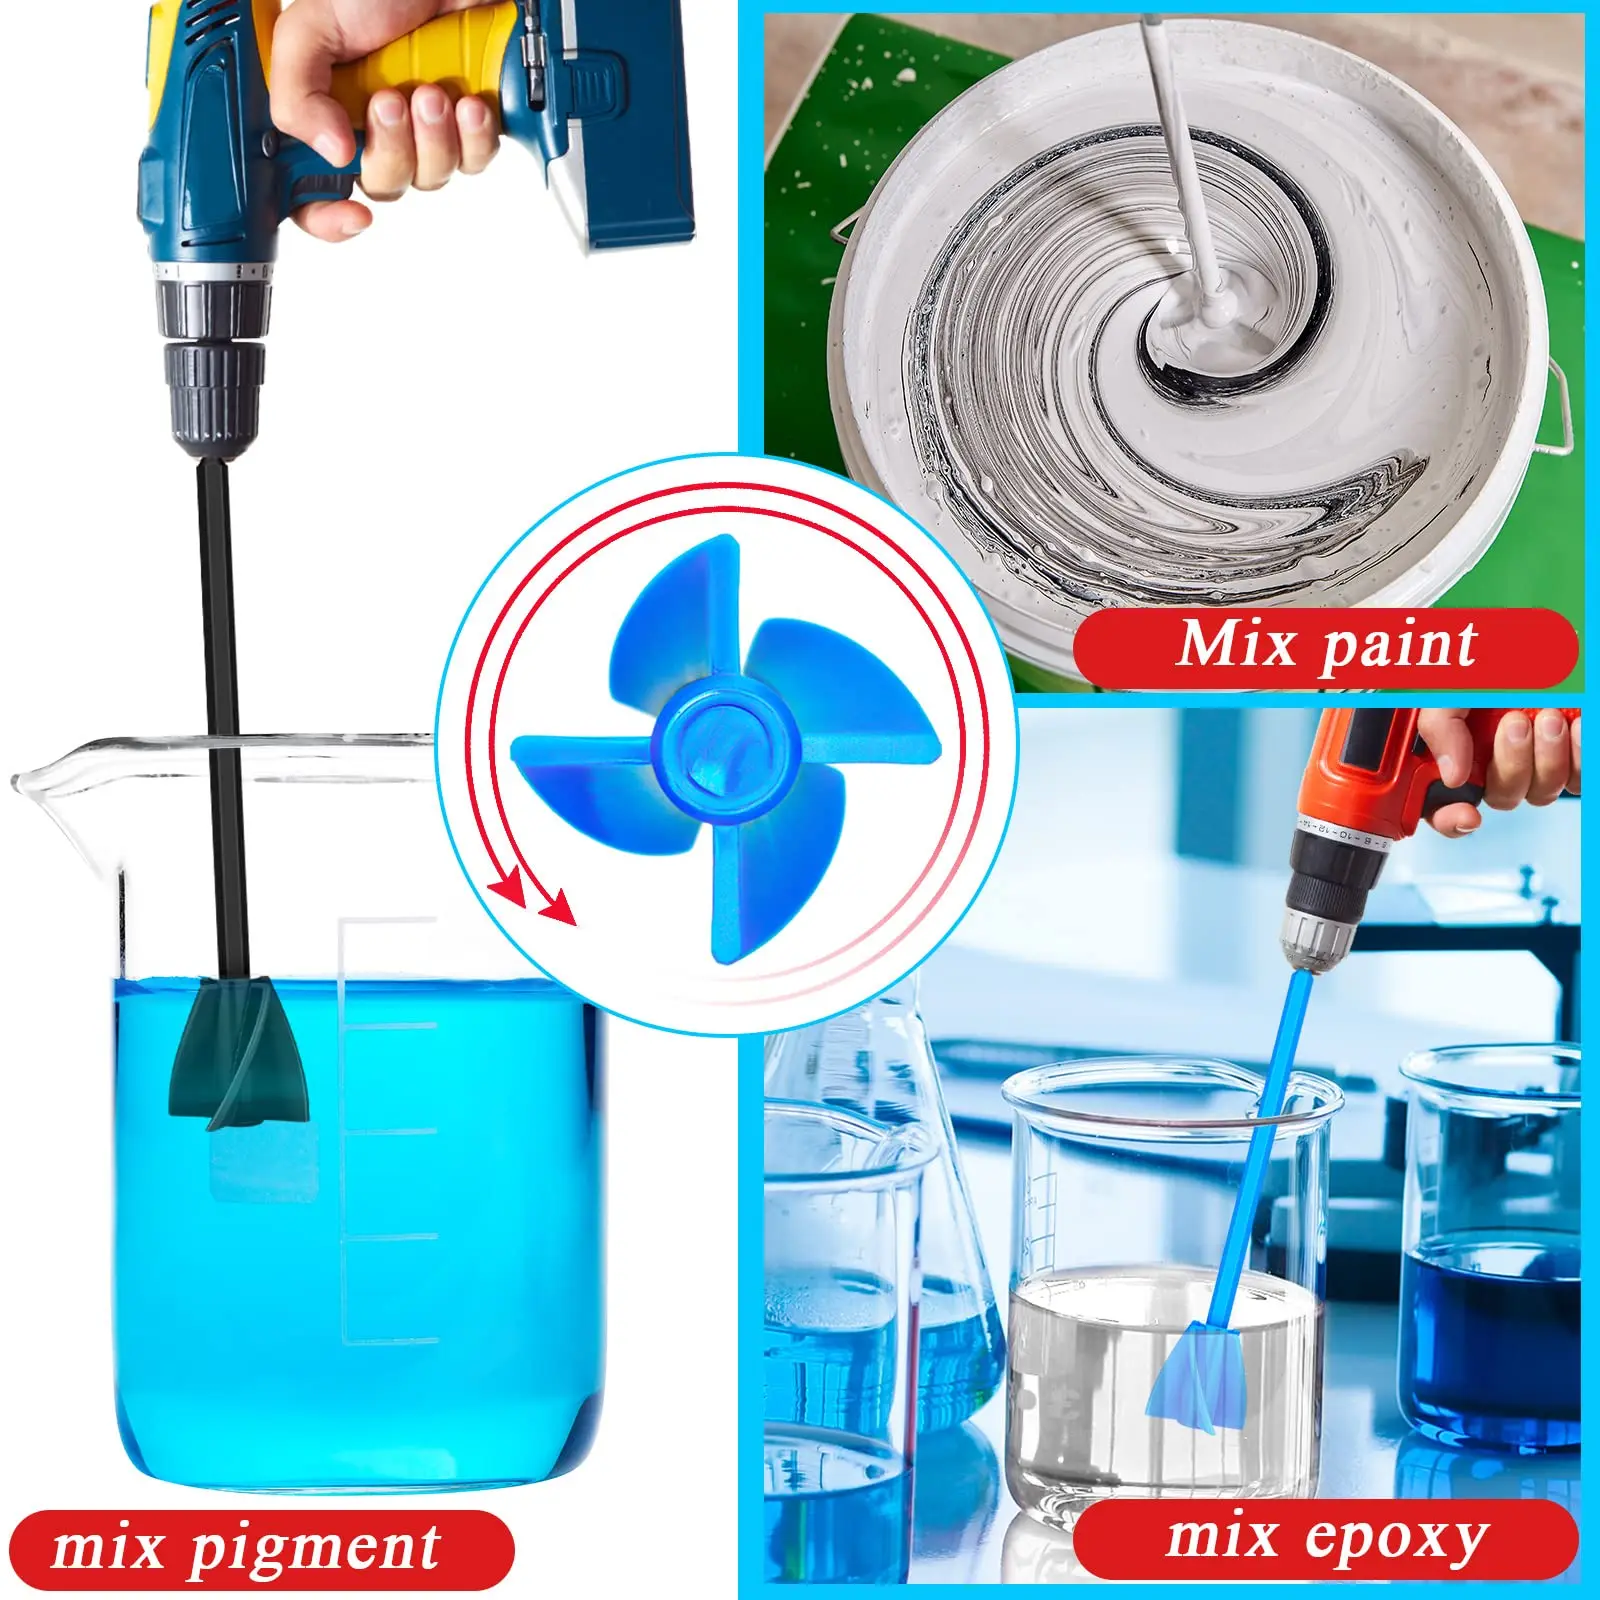 2pcs Epoxy Mixer Mud Power Mixer Blade Drill Tool for Mixing 1/4" Plastic Paddle Replace Resin Mixer Drill Attachment Accessory images - 6